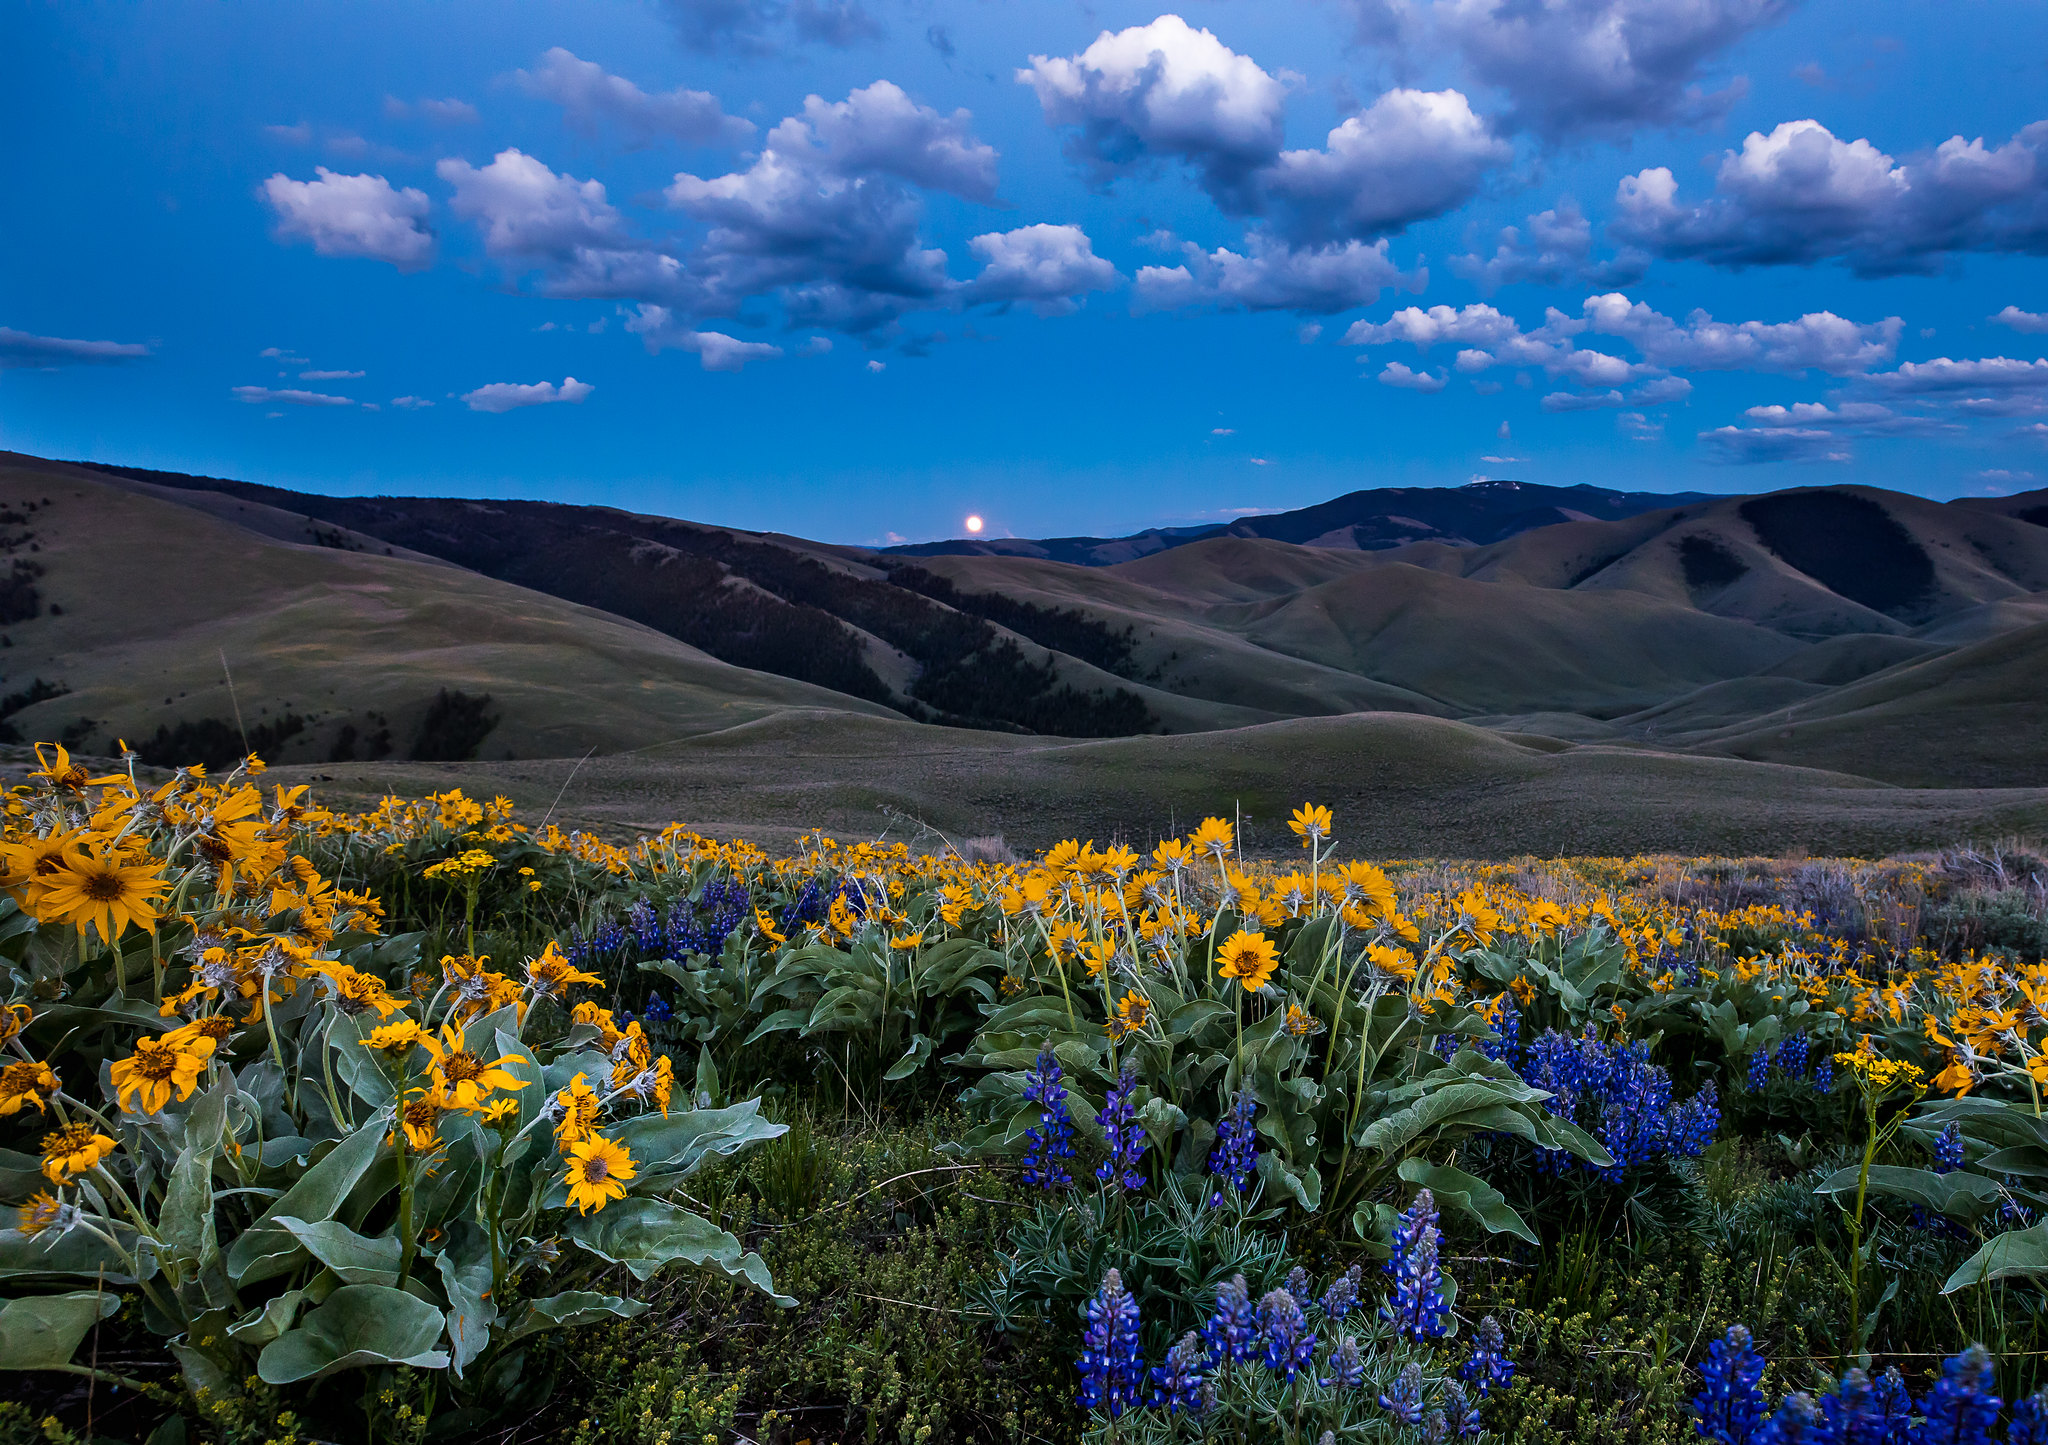 Full moon rising over a field of flowers at Lemhi Pass.